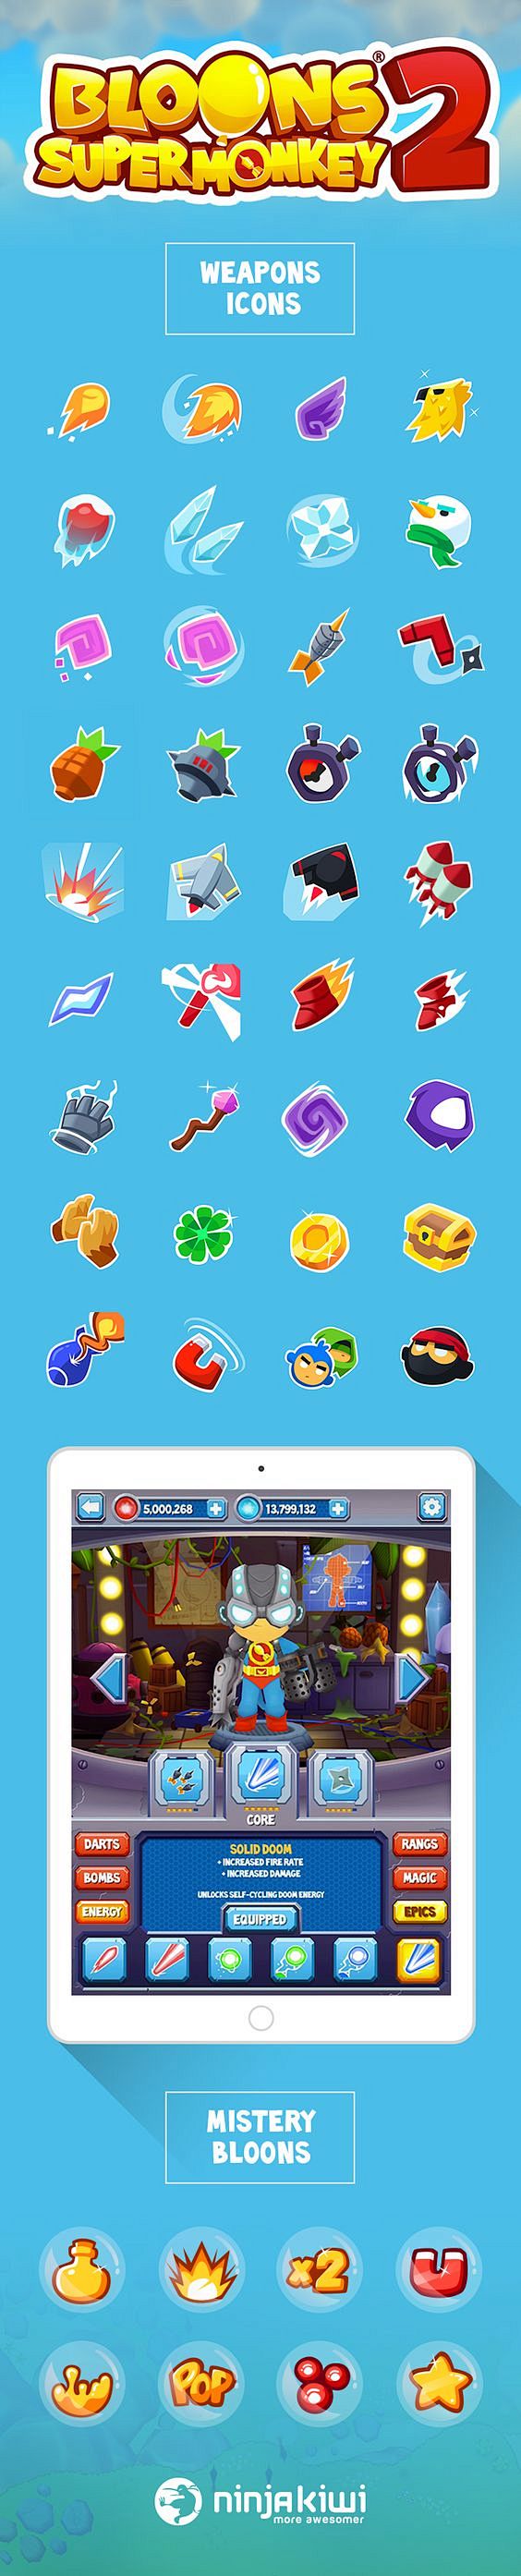 Icons design - Bloon...